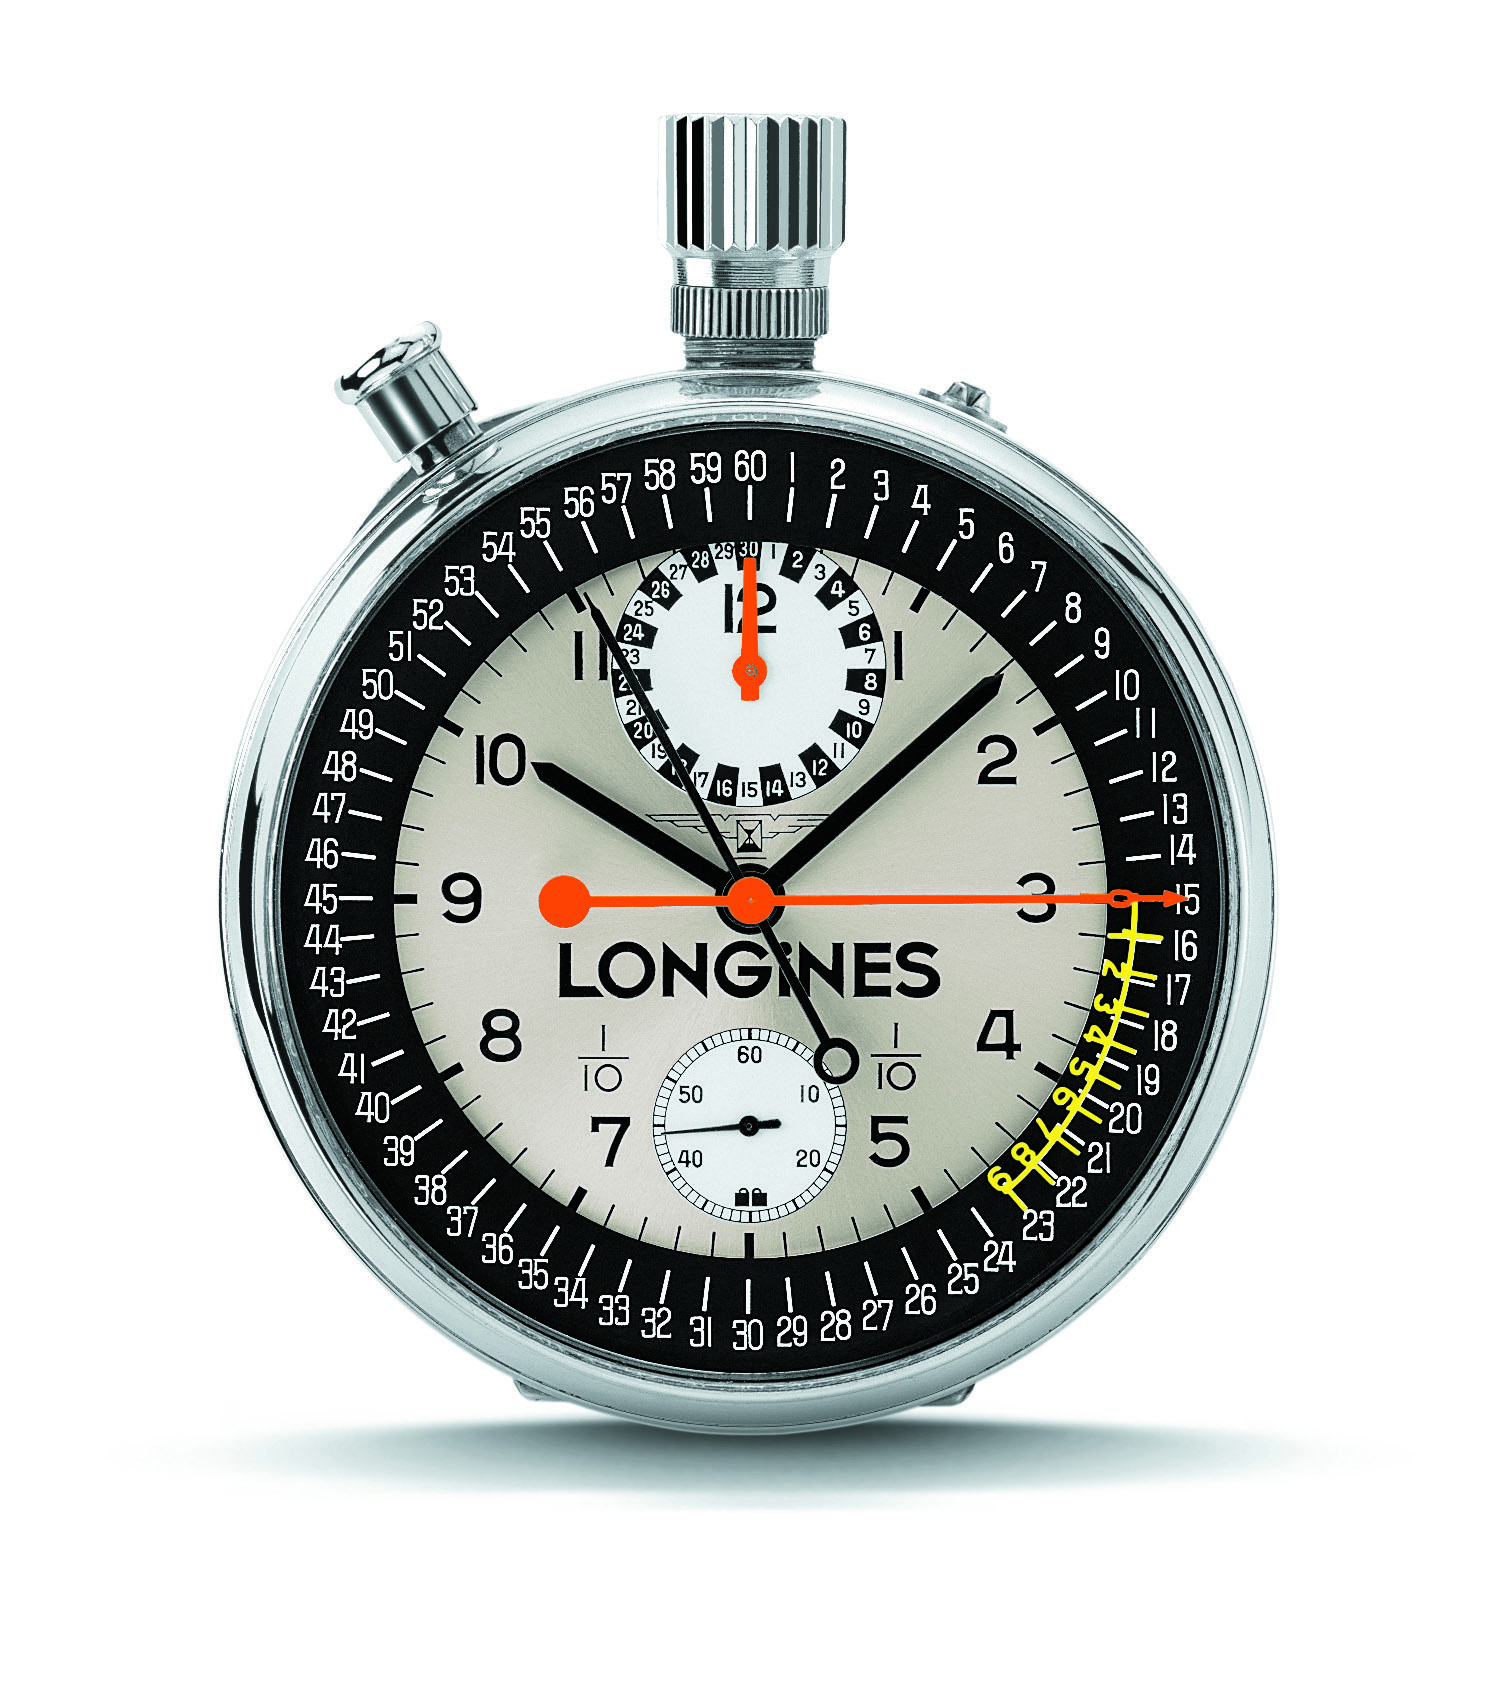 Longines ref 262 chronograph pocket watch launched in 1966. Image: Longines.